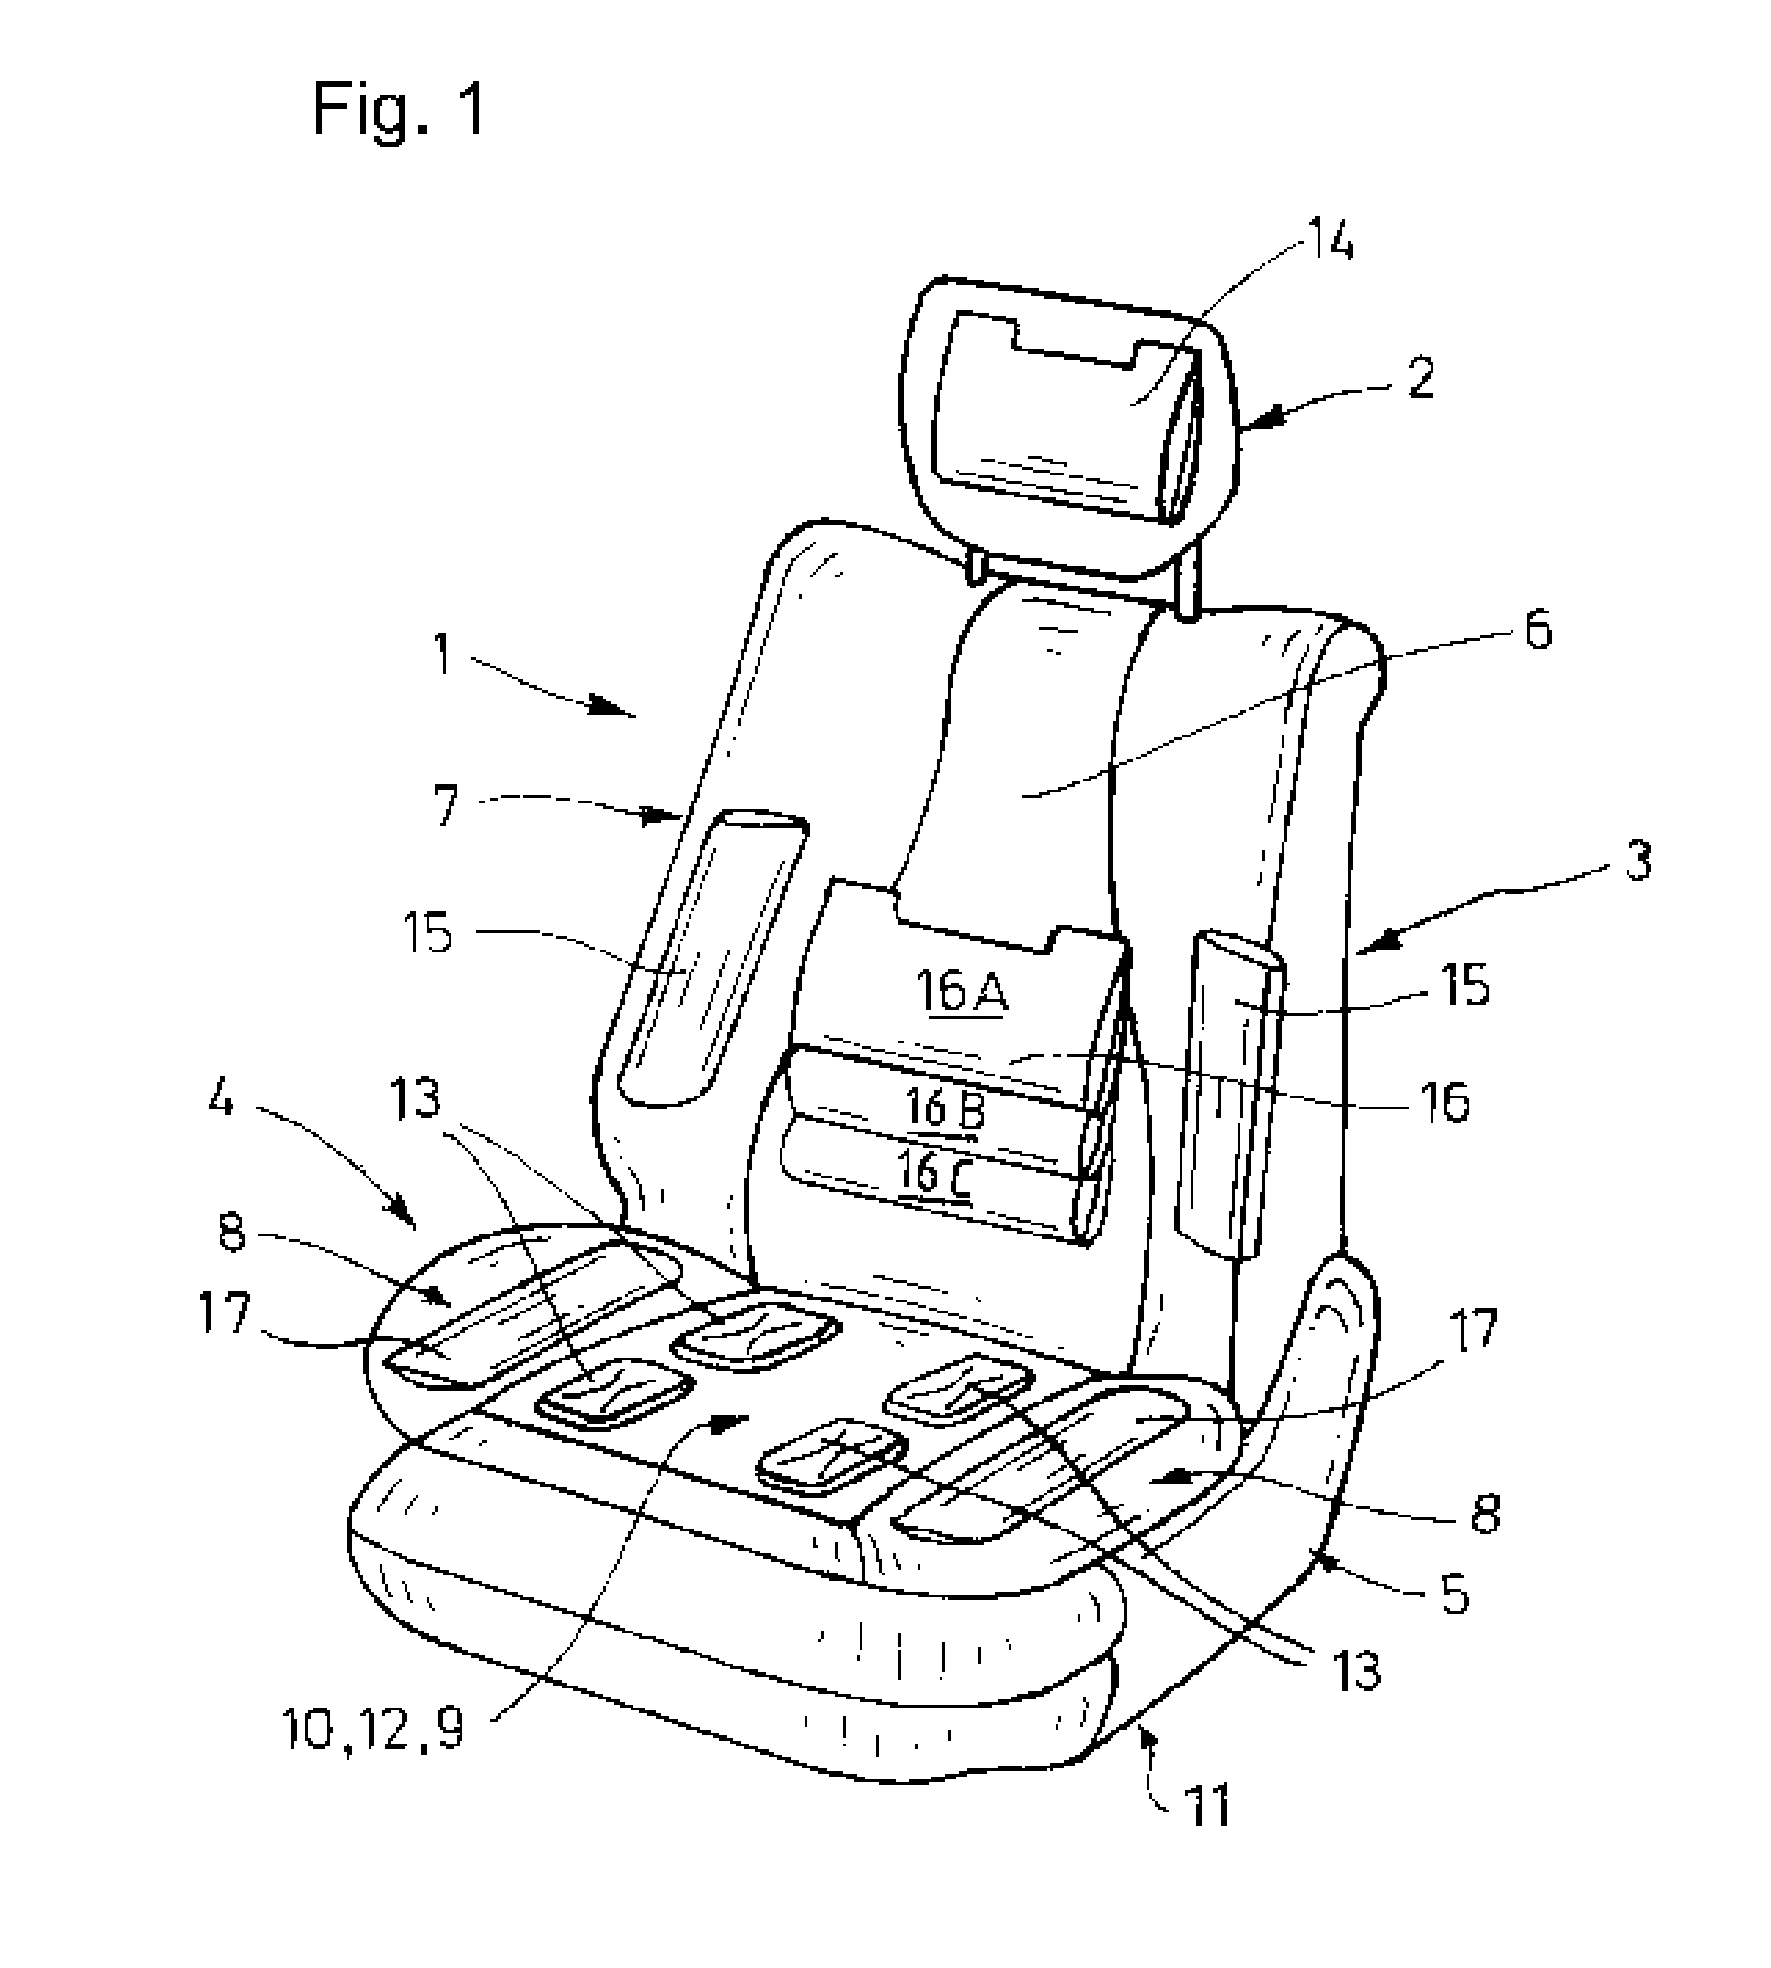 Method and apparatus for controlling massage functions of a motor vehicle seat